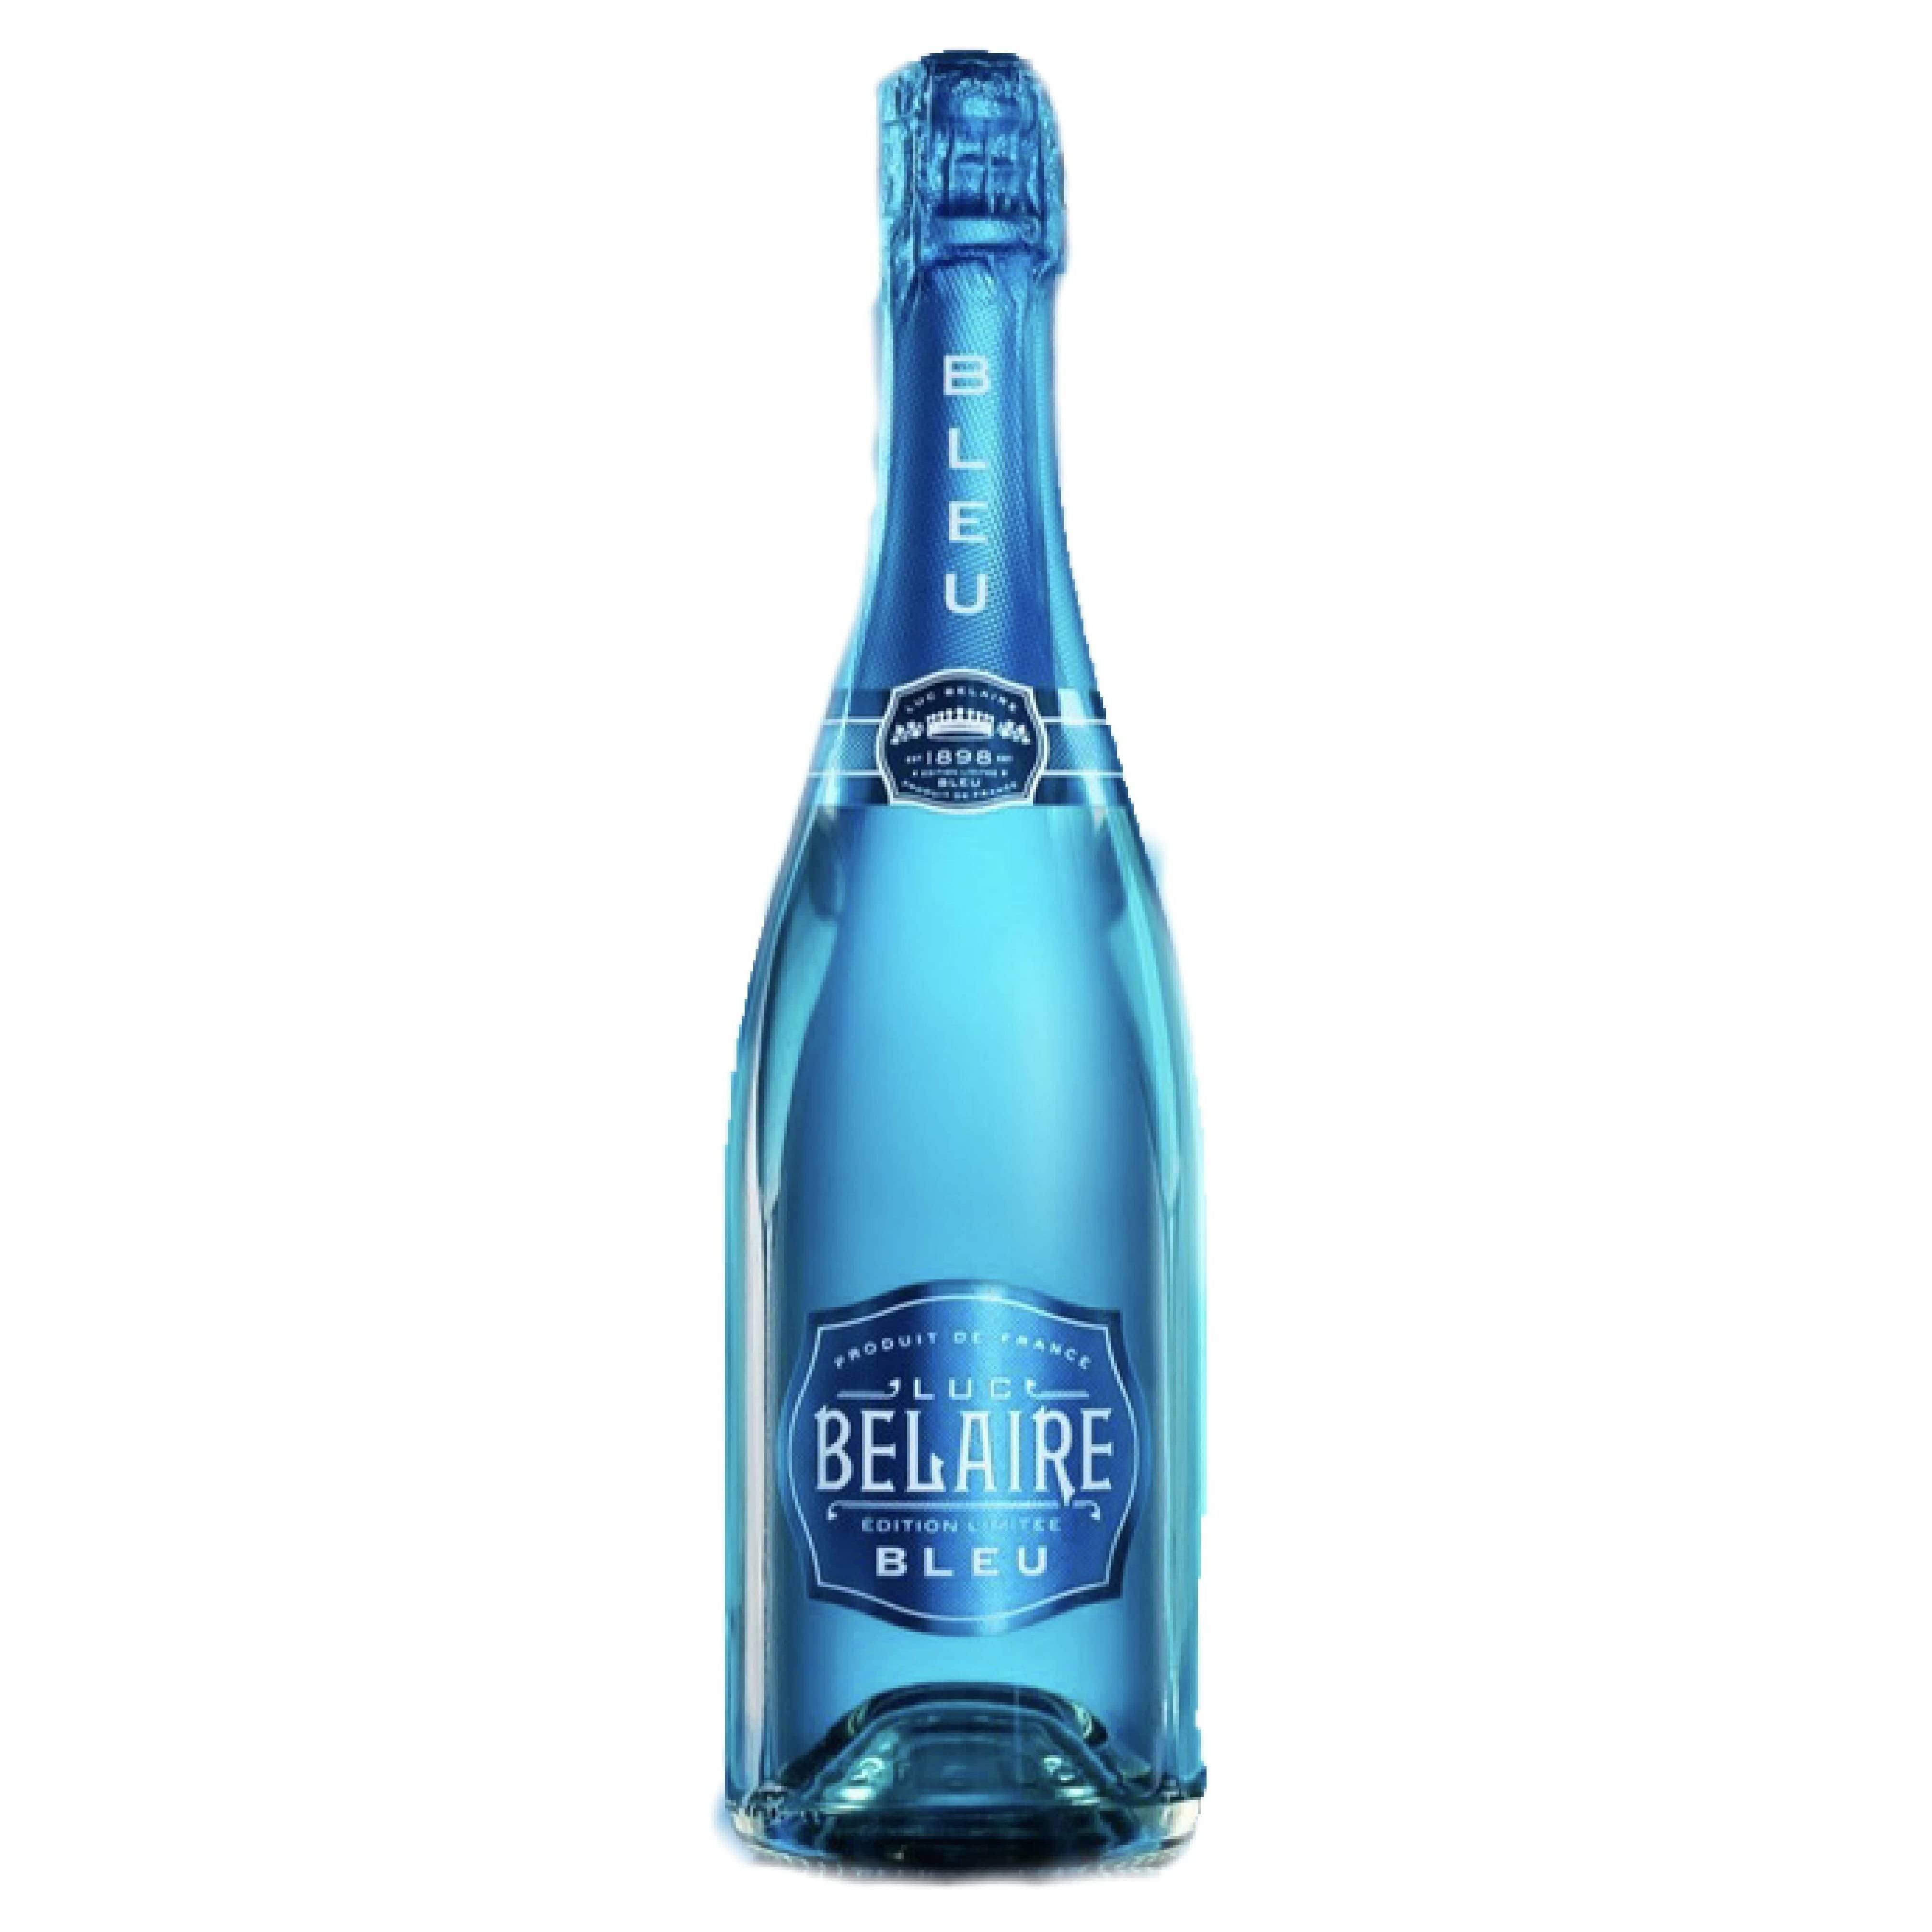 Luc Belaire Bleu (750ml) French Sparkling Wine